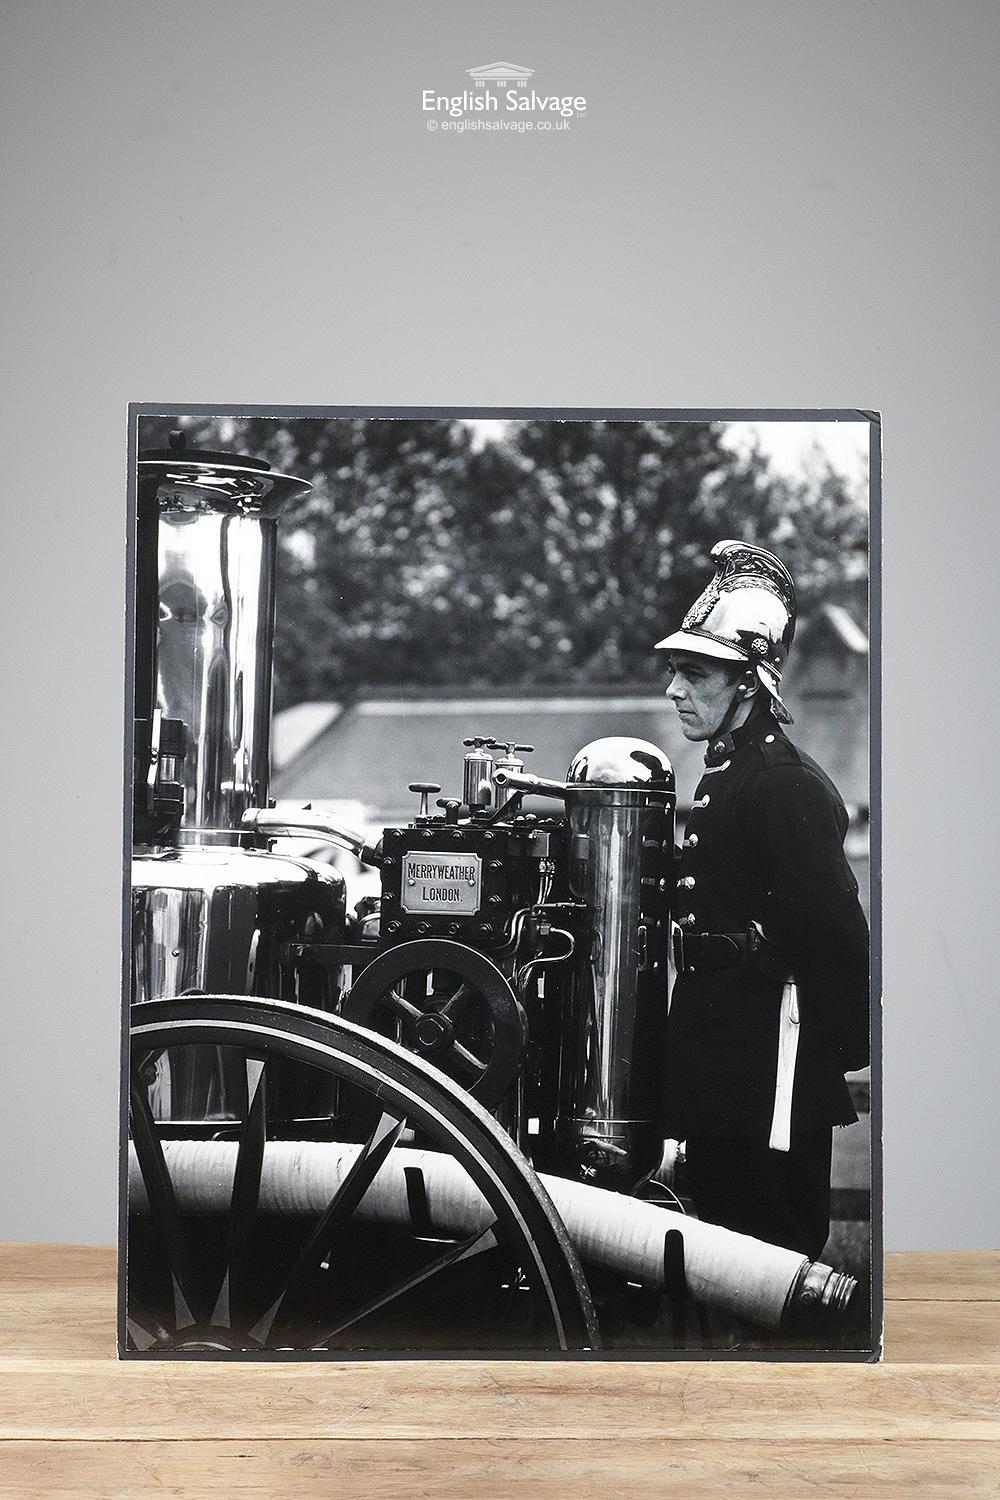 Good sized black and white photo of a fireman stood by a vintage Merryweather London fire engine. Mounted on a black card, would look lovely displayed on its own or in a group. Few minor areas of wear to the corners.